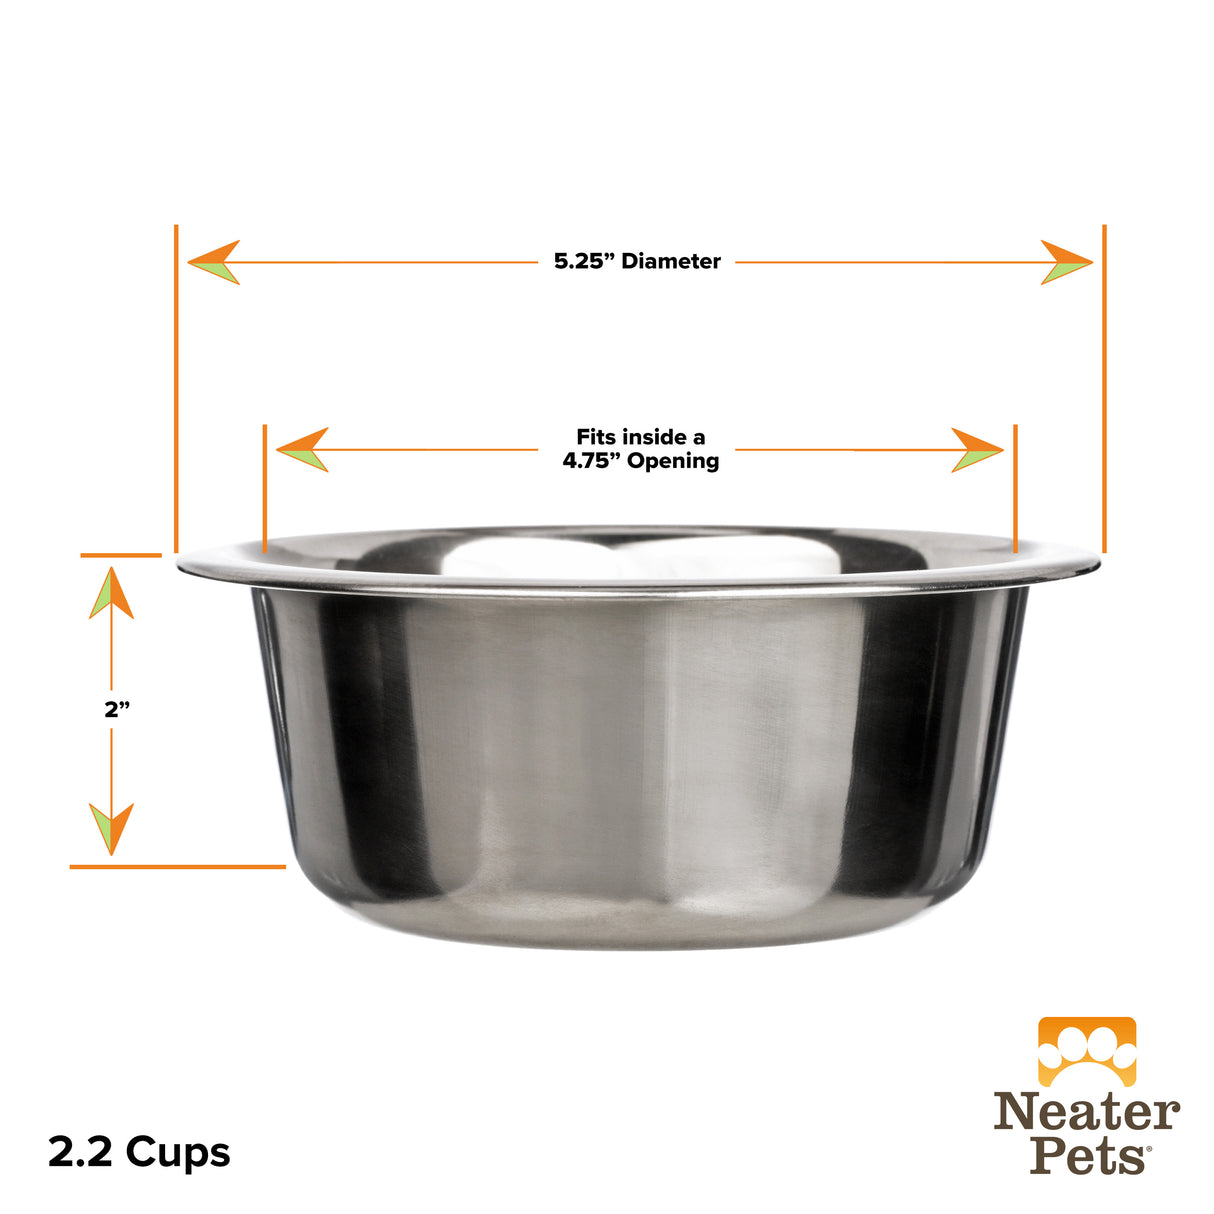 2.2 cup Stainless Steel Replacement Bowls for Neater Feeder dimensions